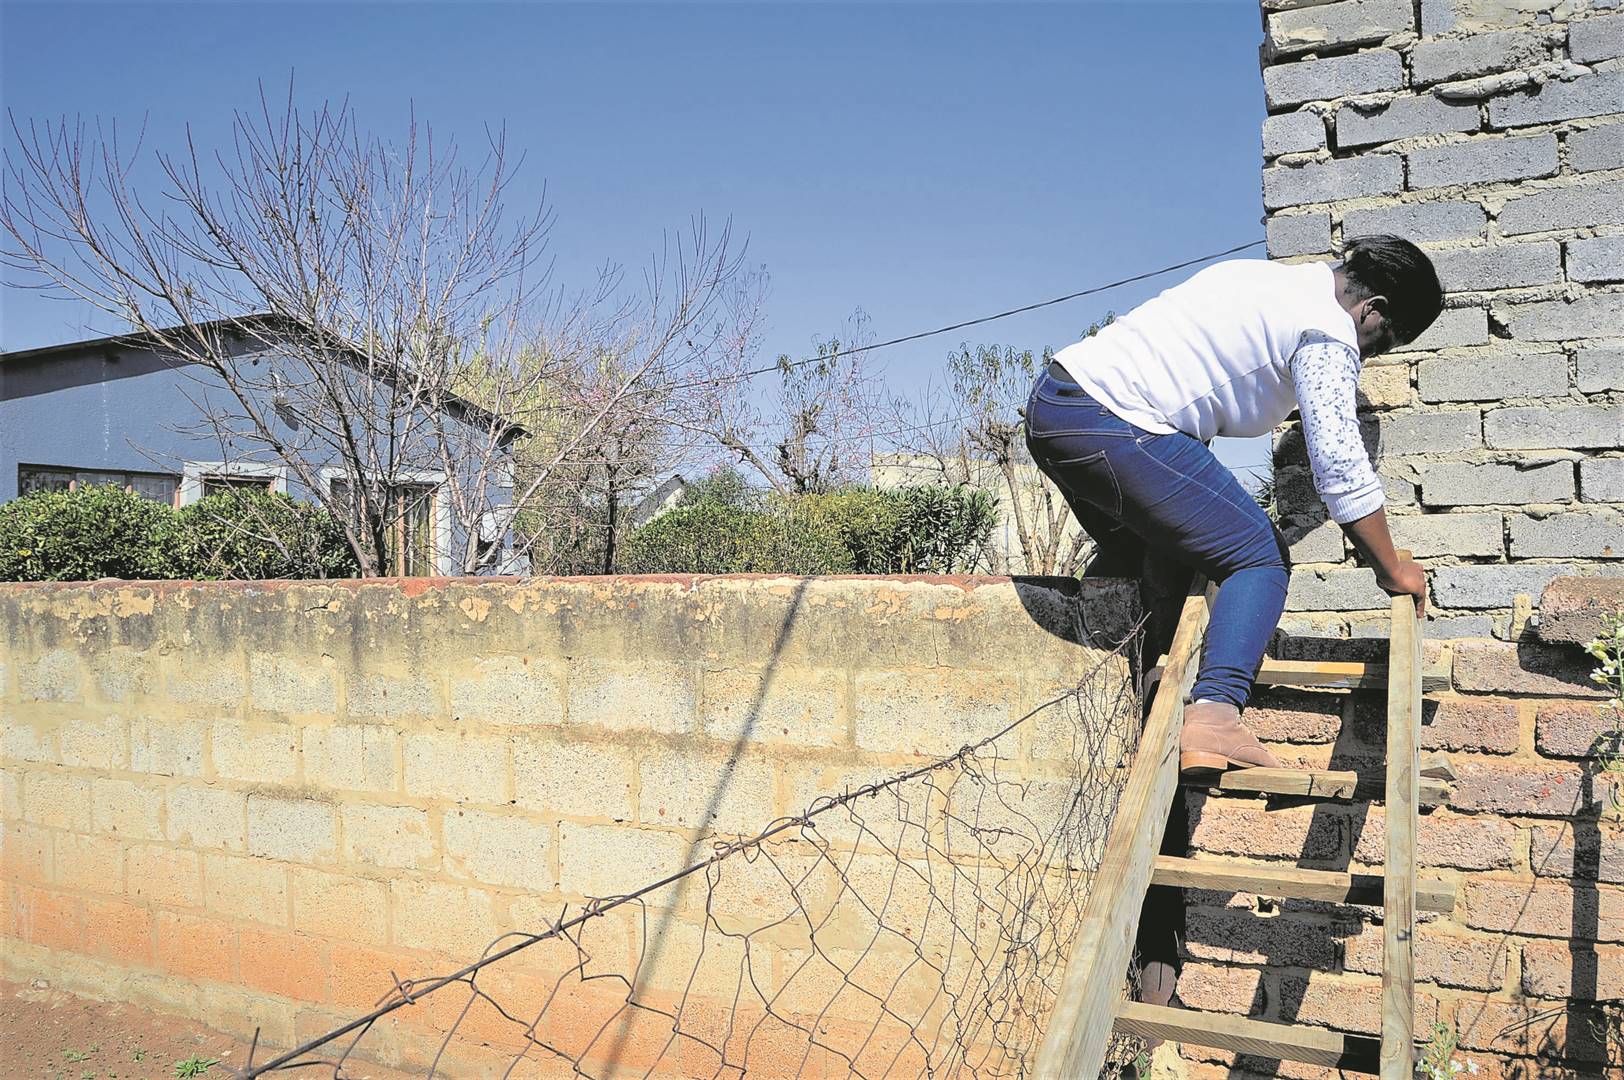 This ladder is the only way Sesi Makhaya can get in and out of home. Photo by Tumelo Mofokeng